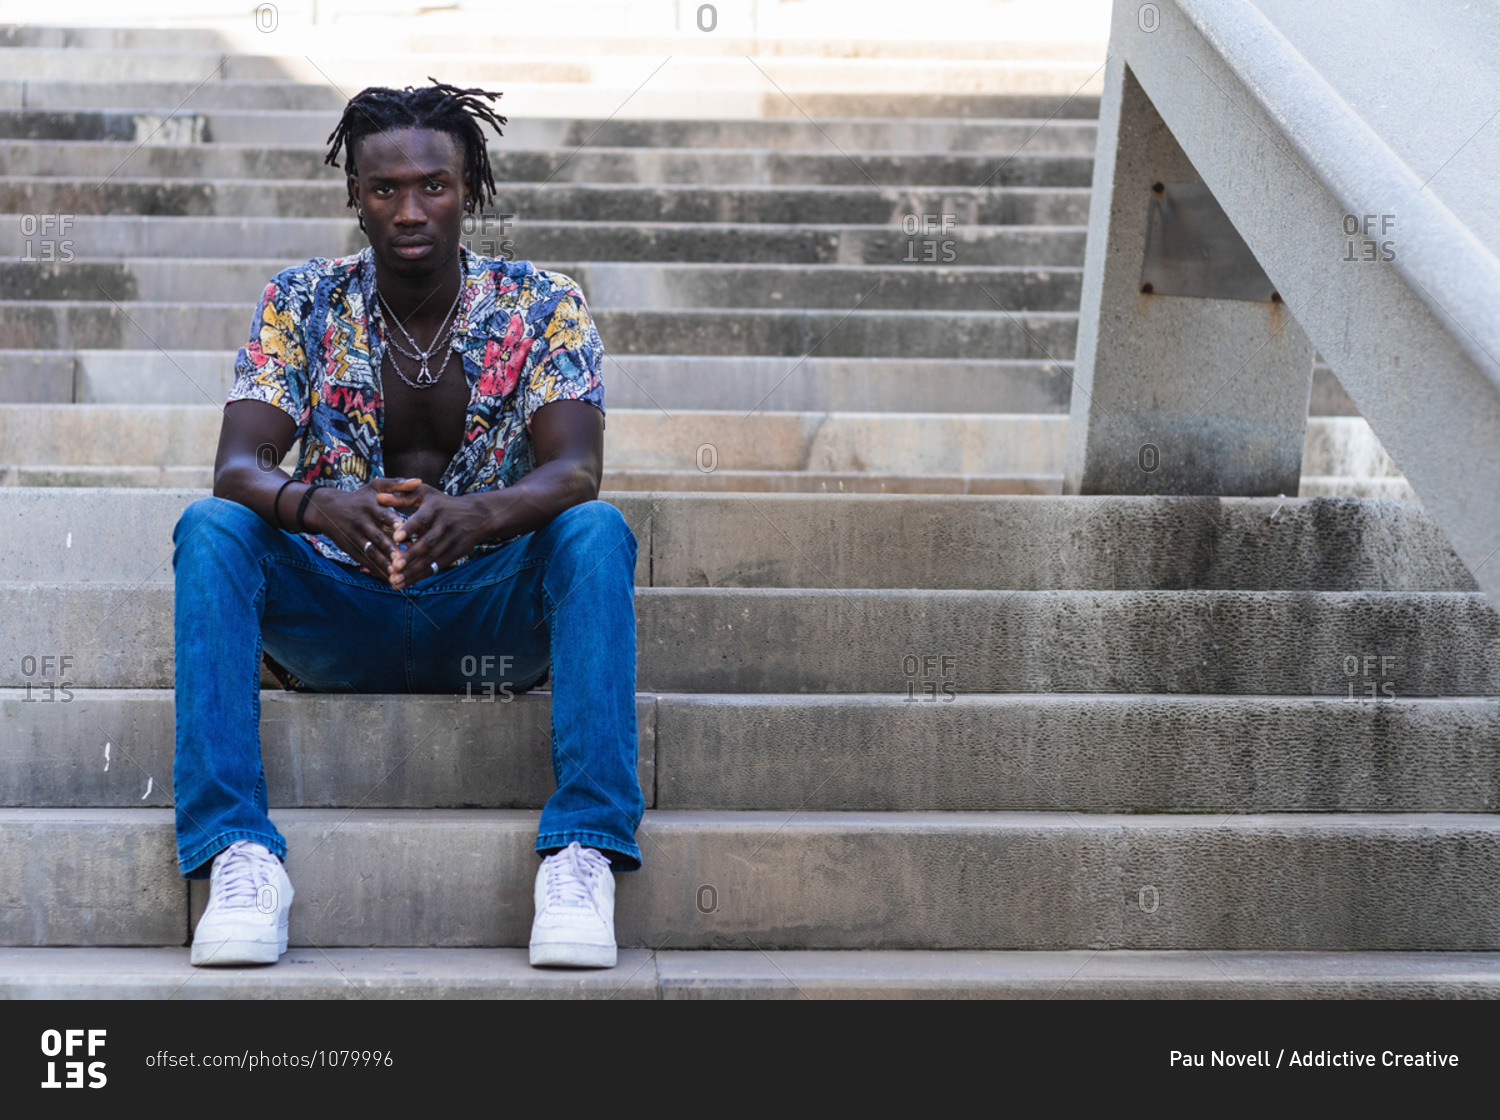 Low angle full body of serious African American male in colorful shirt and jeans with sneakers sitting on stone steps and looking at camera on urban street